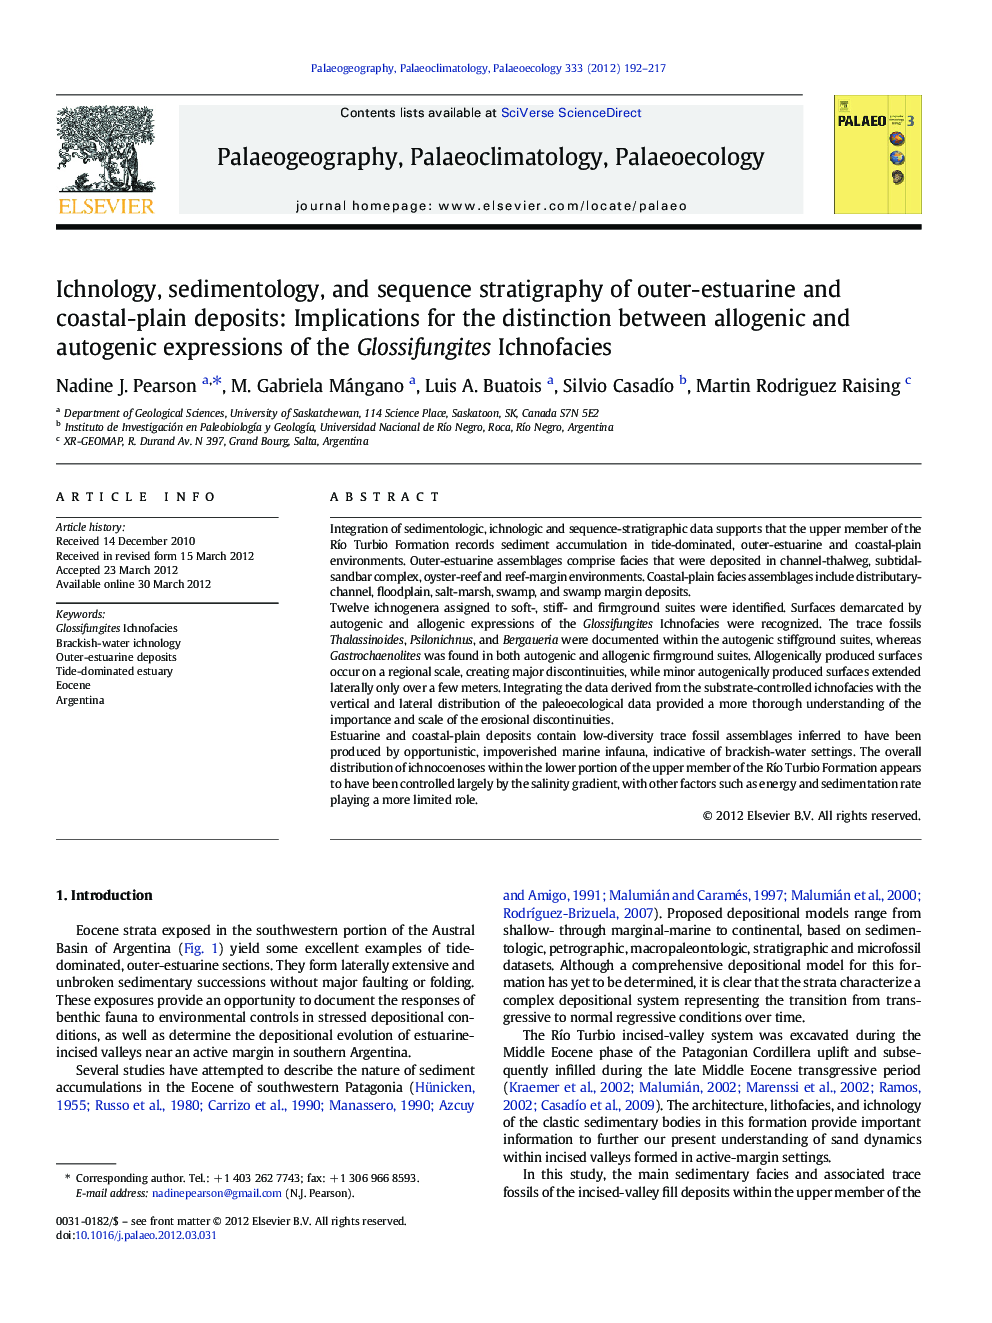 Ichnology, sedimentology, and sequence stratigraphy of outer-estuarine and coastal-plain deposits: Implications for the distinction between allogenic and autogenic expressions of the Glossifungites Ichnofacies